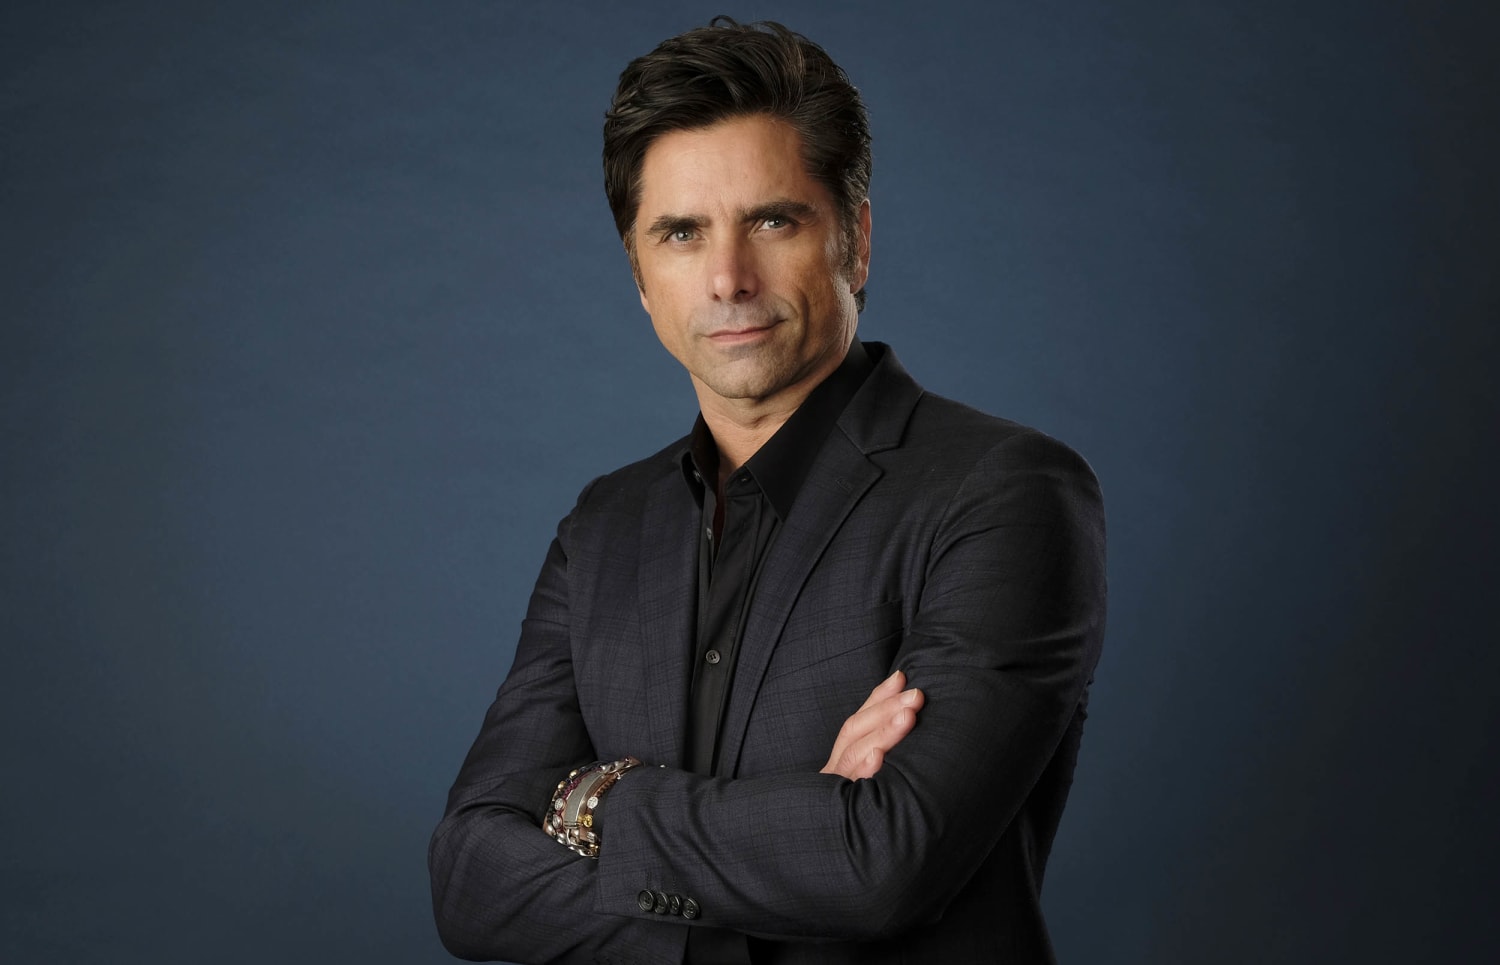 John Stamos reveals that he was sexually abused as a child